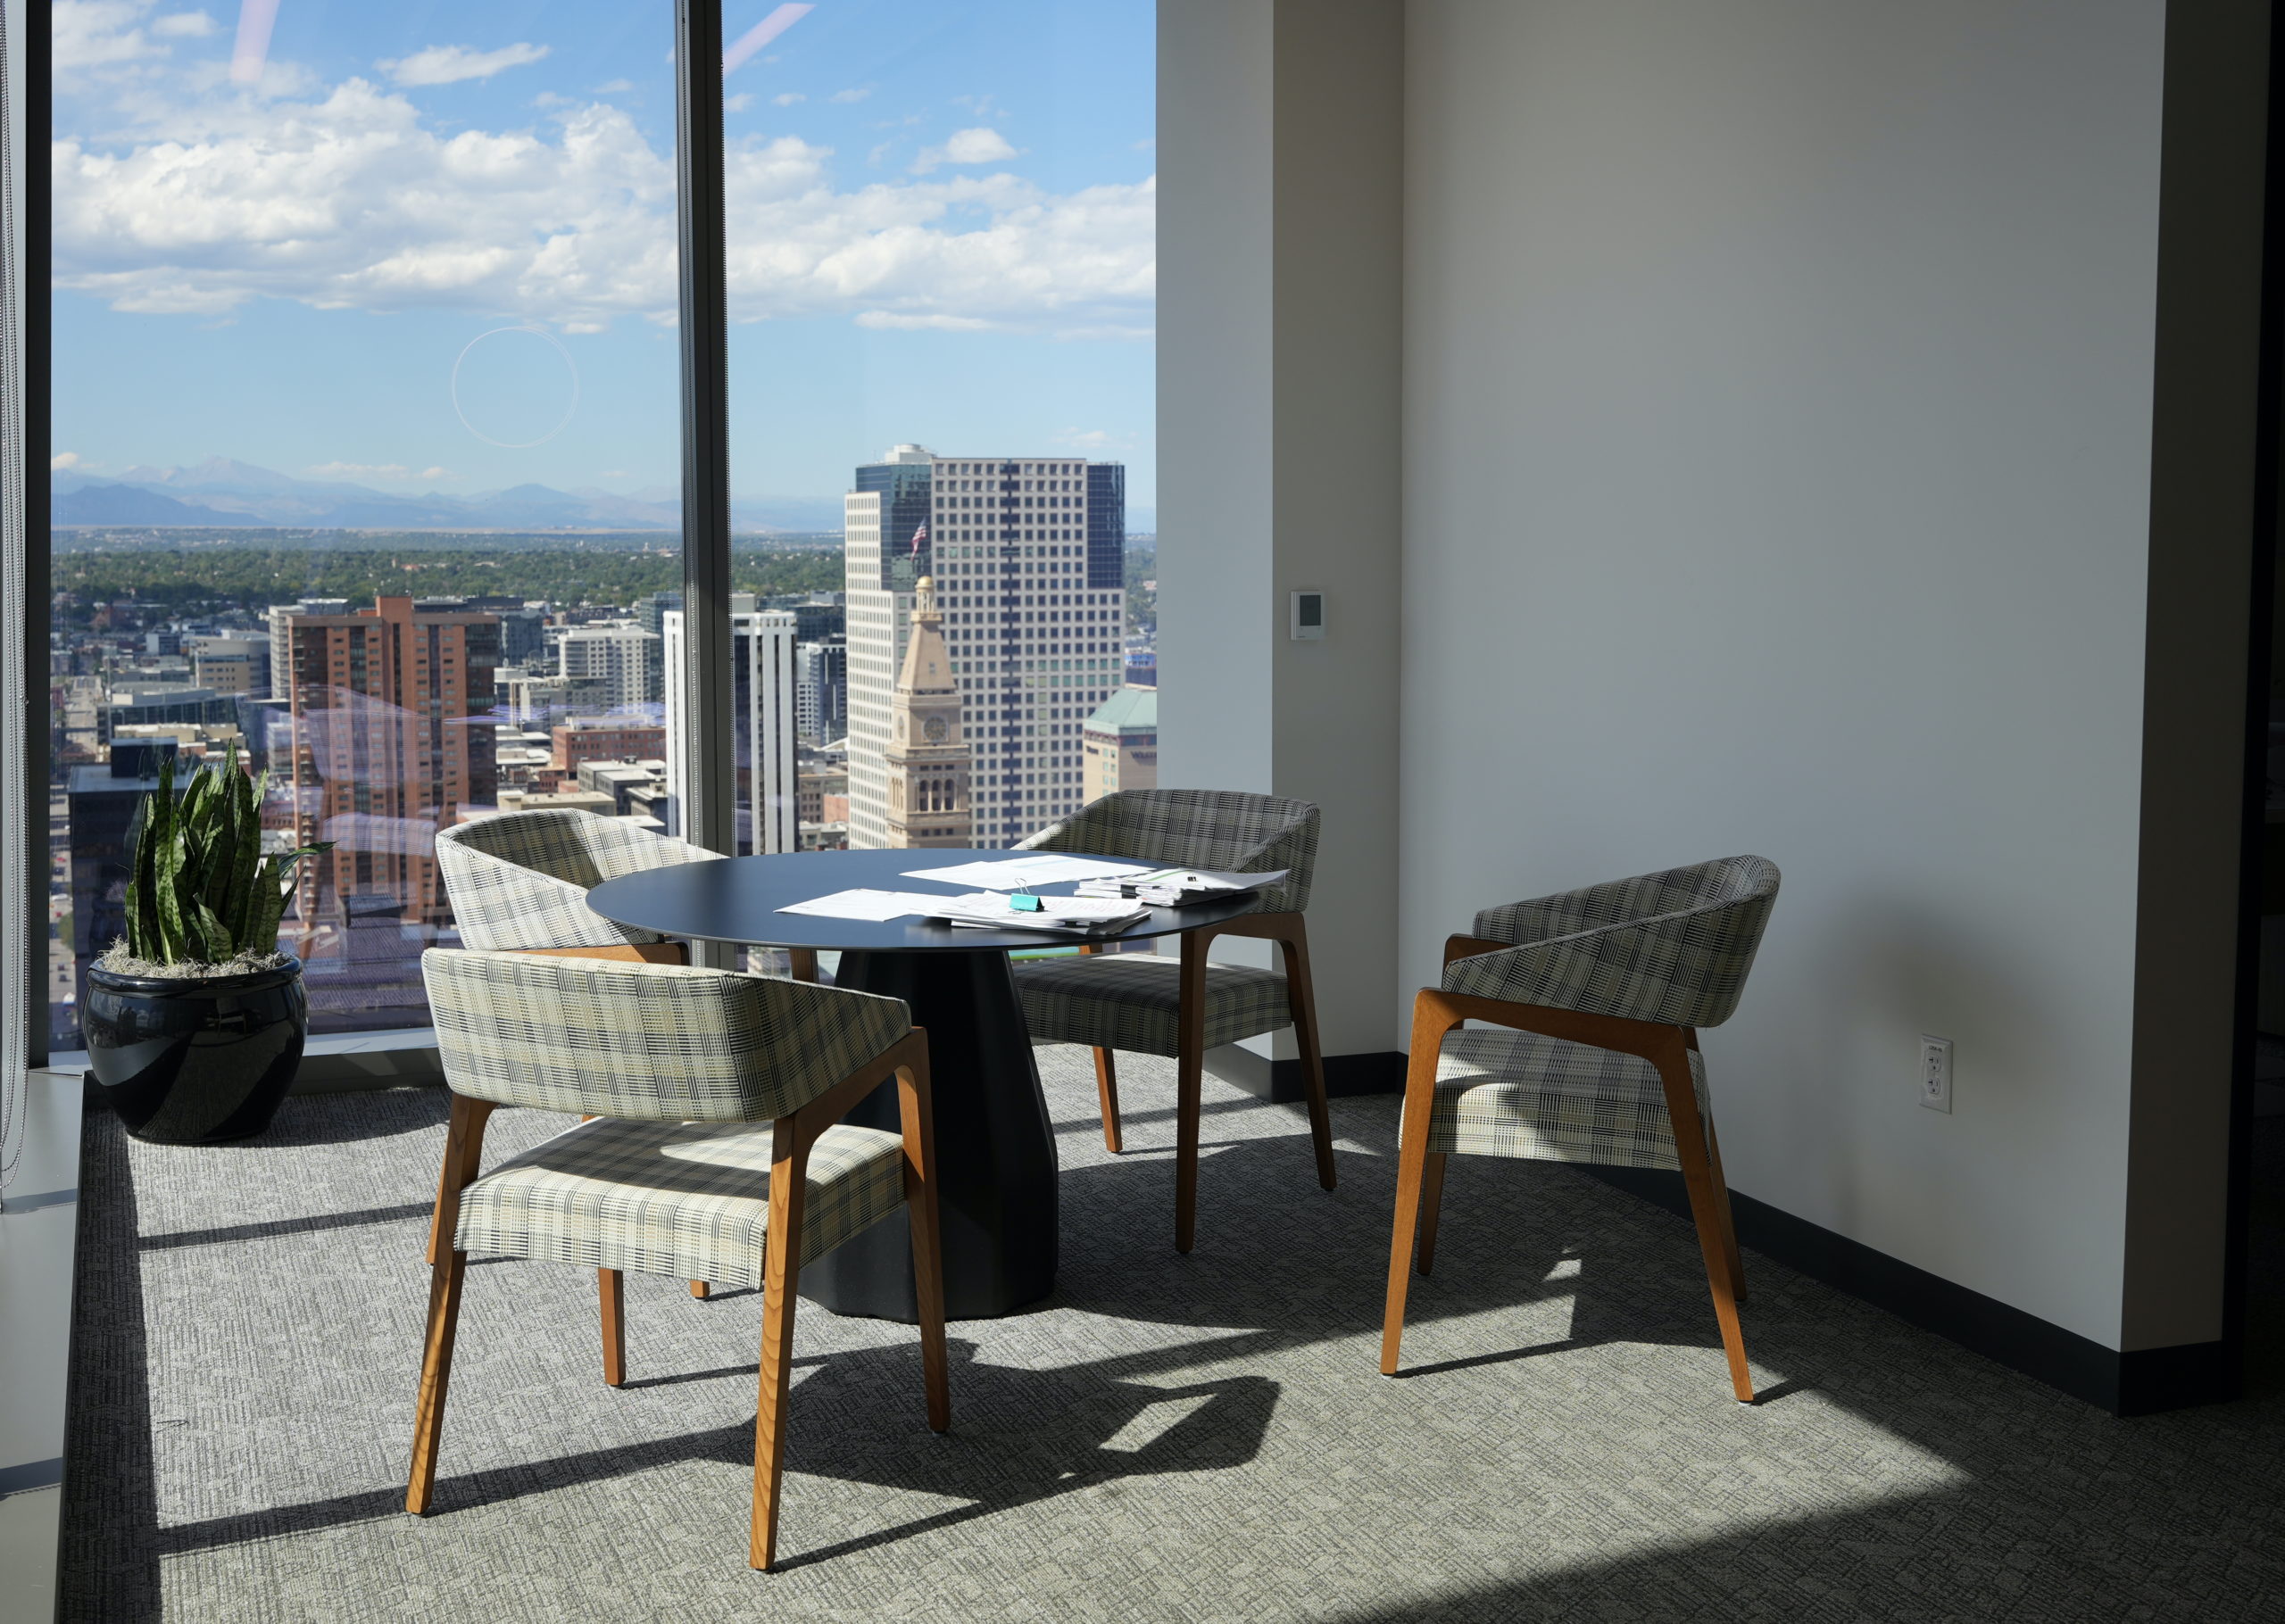 A round table with four cloth chairs around it and papers on top is in an office alcove. Two sides of the alcove are floor length glass windows. Outside, is a view of downtown Denver with mountains in the background. 